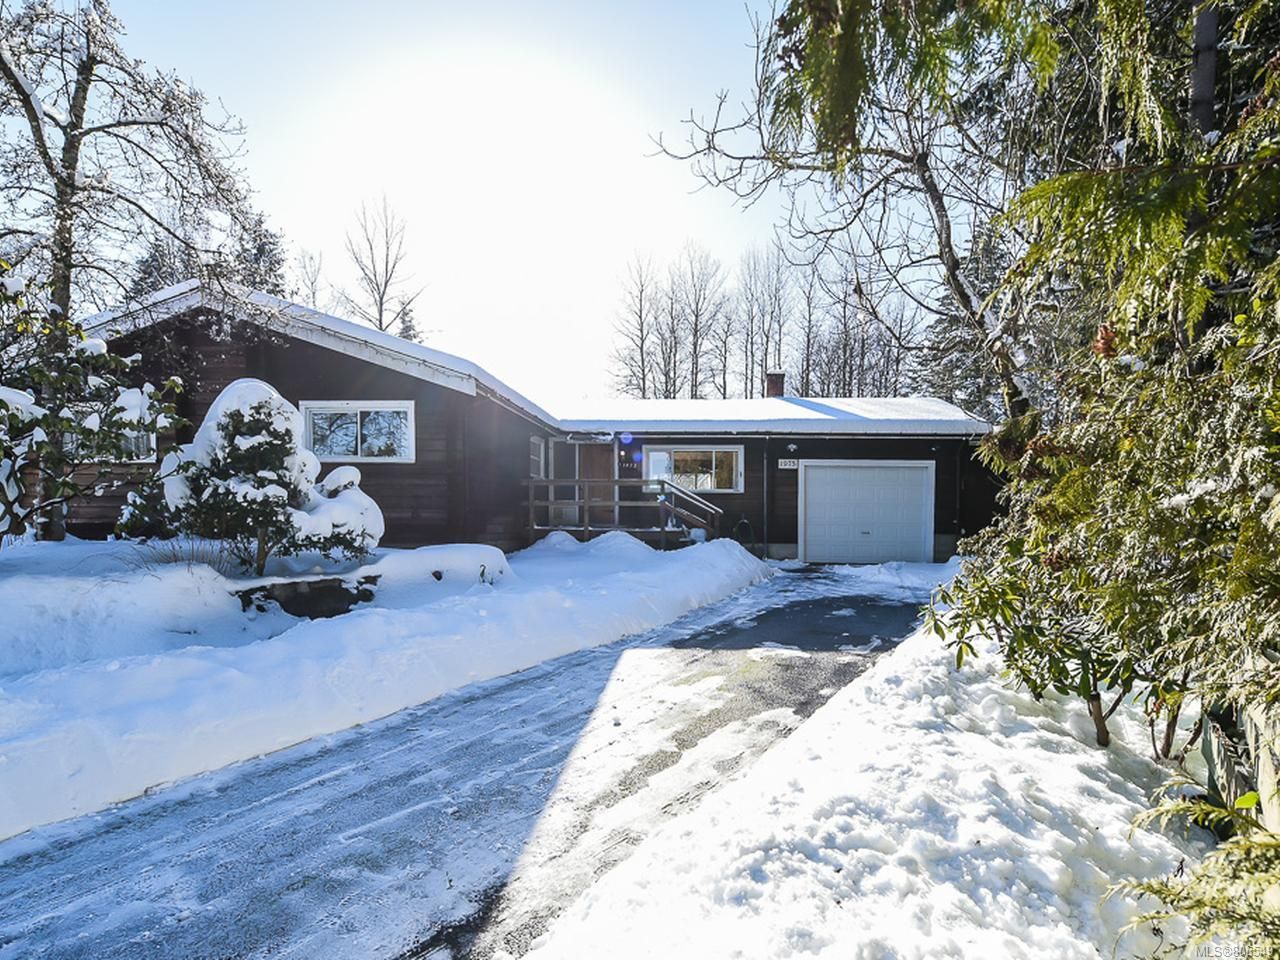 Main Photo: 1975 DOGWOOD DRIVE in COURTENAY: CV Courtenay City House for sale (Comox Valley)  : MLS®# 806549